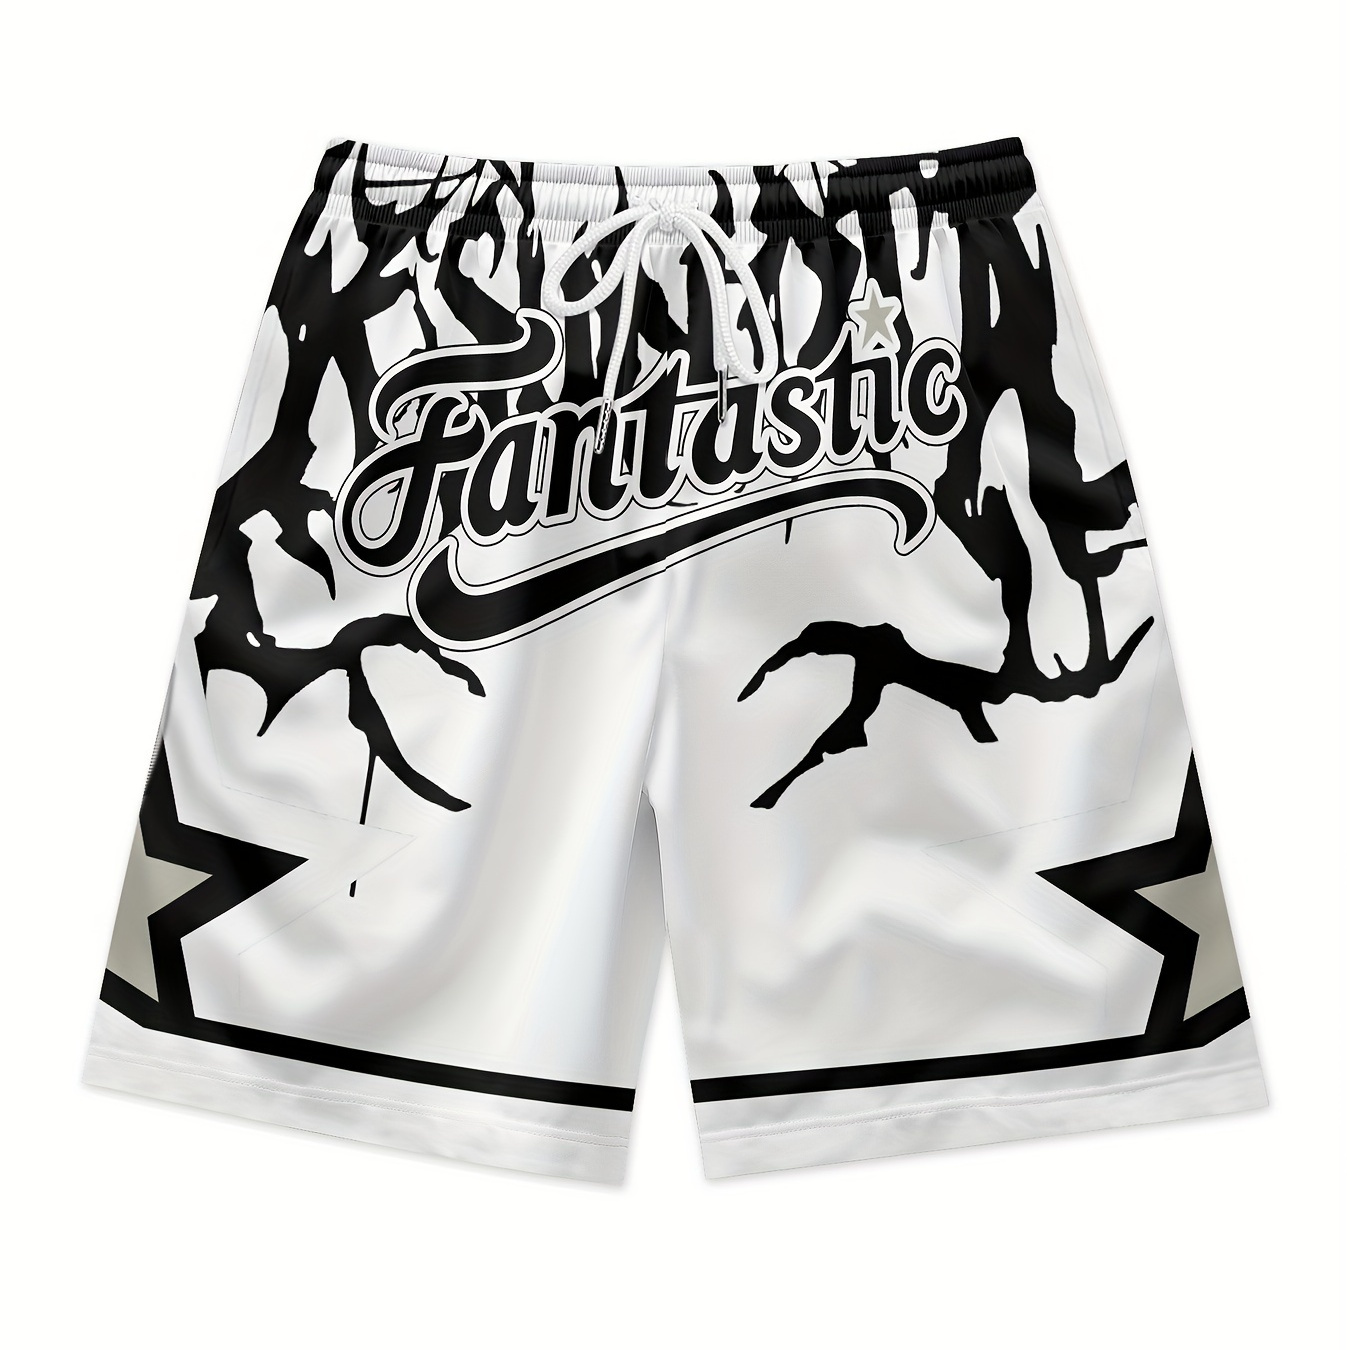 

Letters Star Print Men's Summer Drawstring White Waist Shorts Quick Dry Breathable Polyester Shorts Daily Streetwear Vacation Beach Shorts Sweatpants Sport Clothing Bottoms